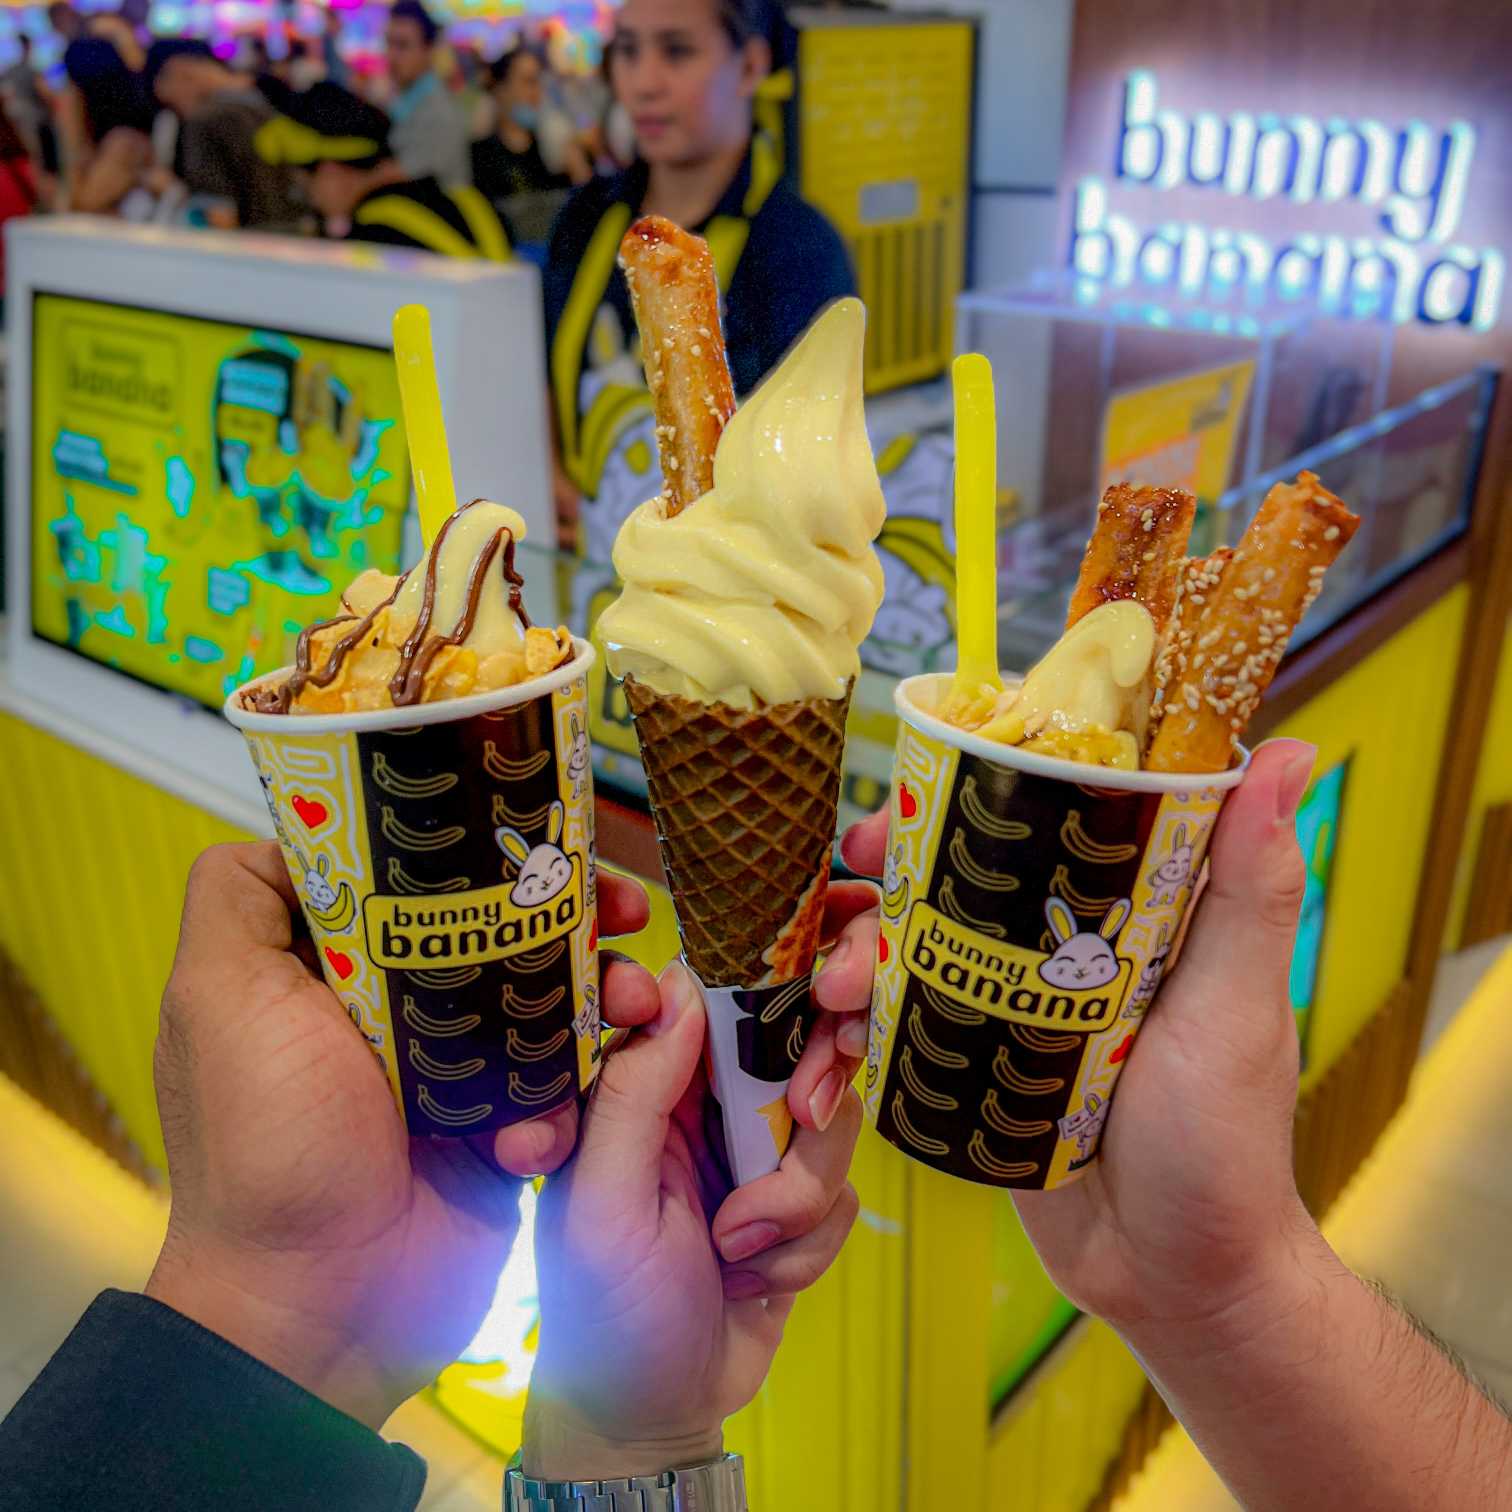 From Bangus to Banana: Trailblazing Entrepreneur Opens the Country’s First Banana Specialty Kiosk